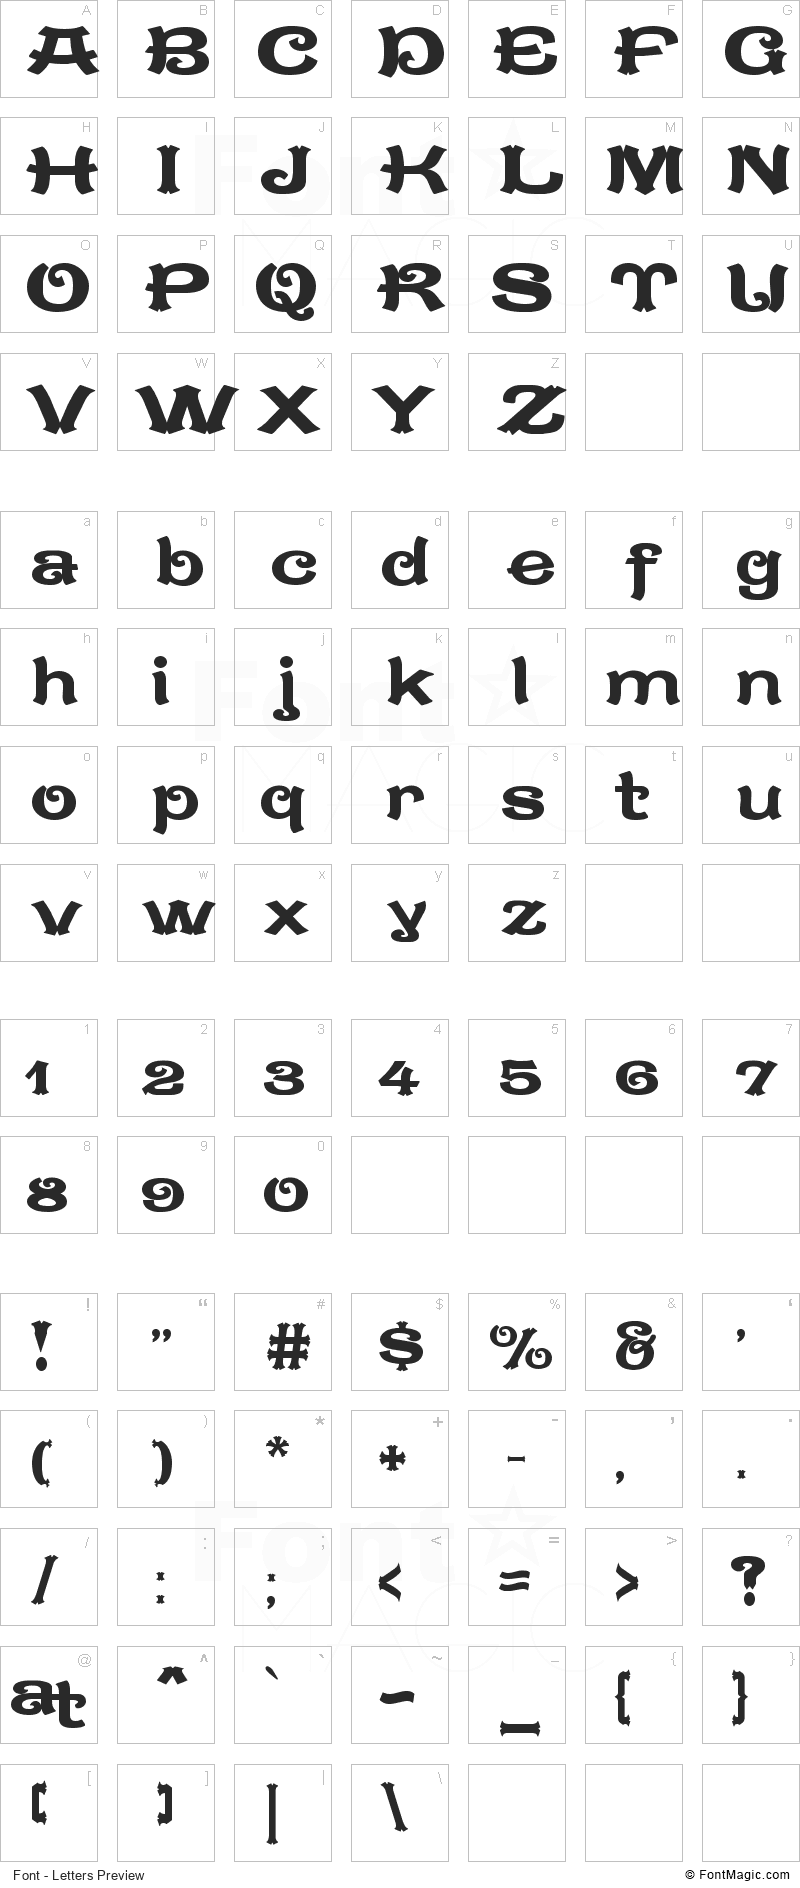 Caractere Doublet Font - All Latters Preview Chart